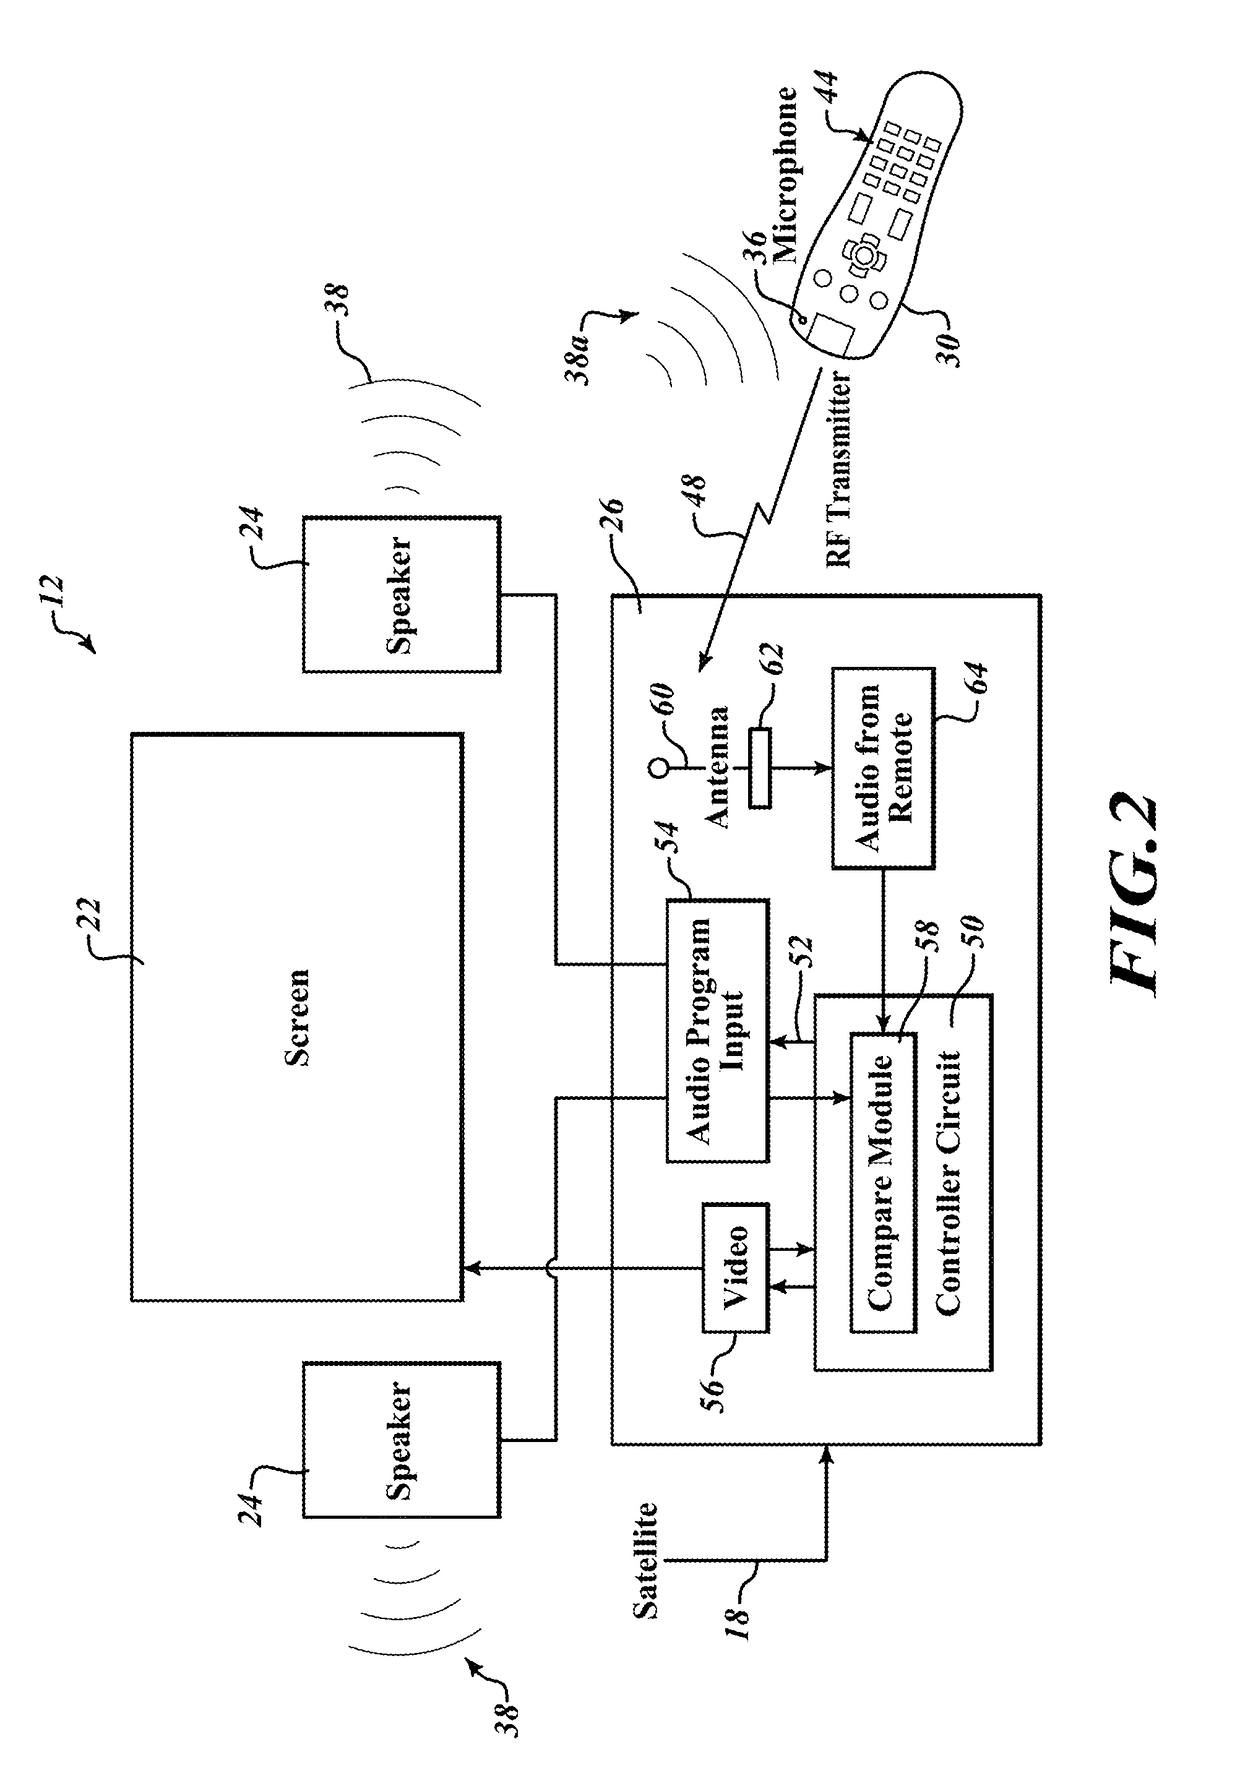 Remote control with microphone used for pairing the remote control to a system and method of using the same